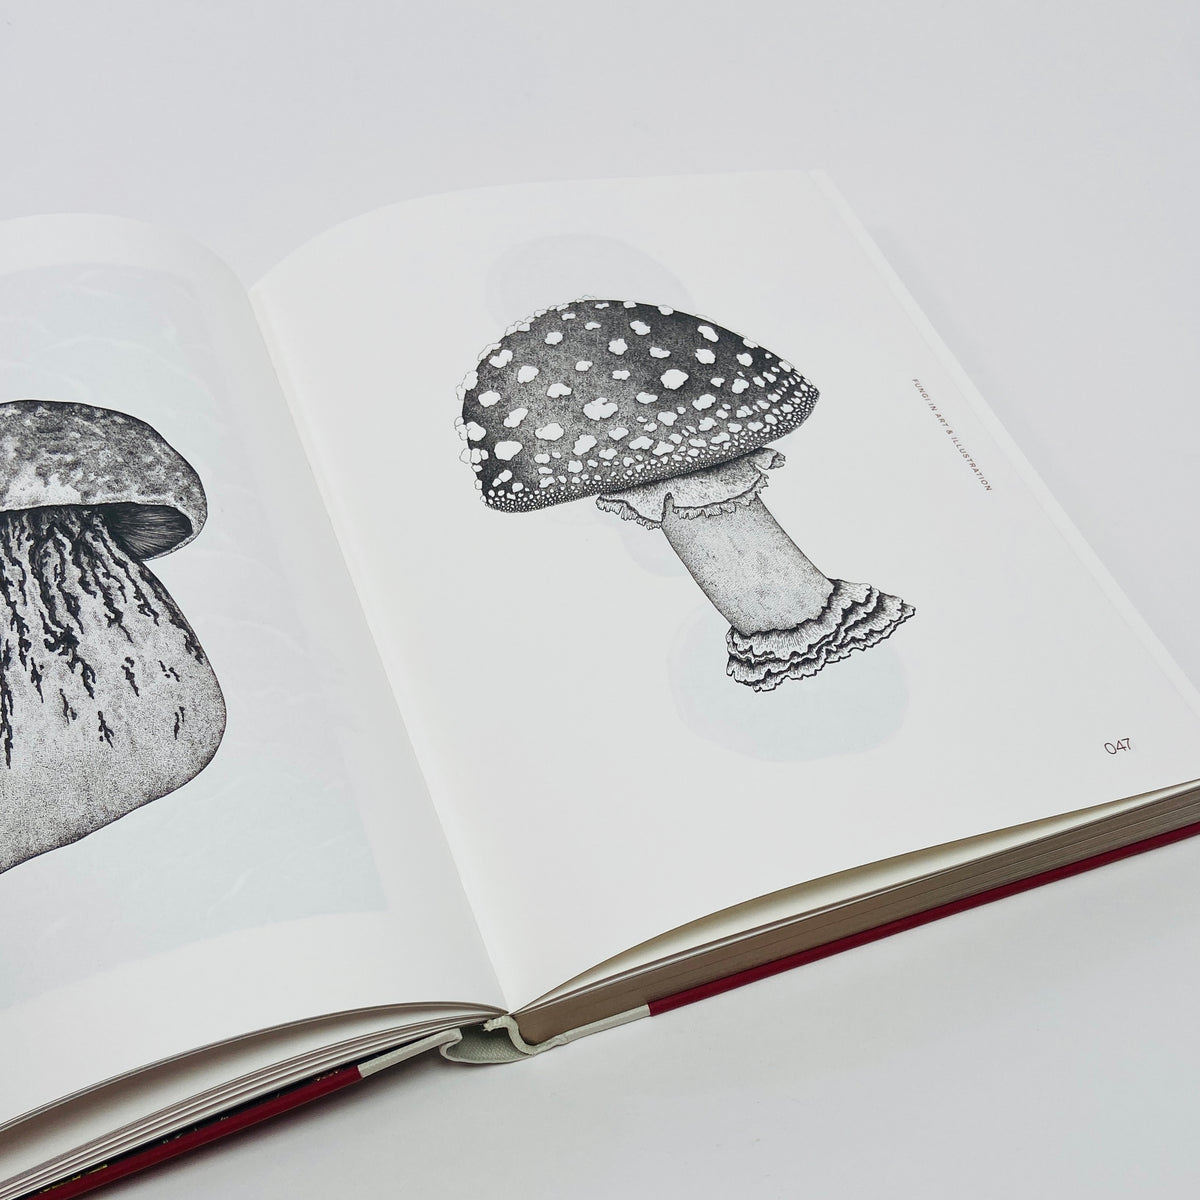 Fungal Inspiration - Art and Design Inspired by Wild Nature